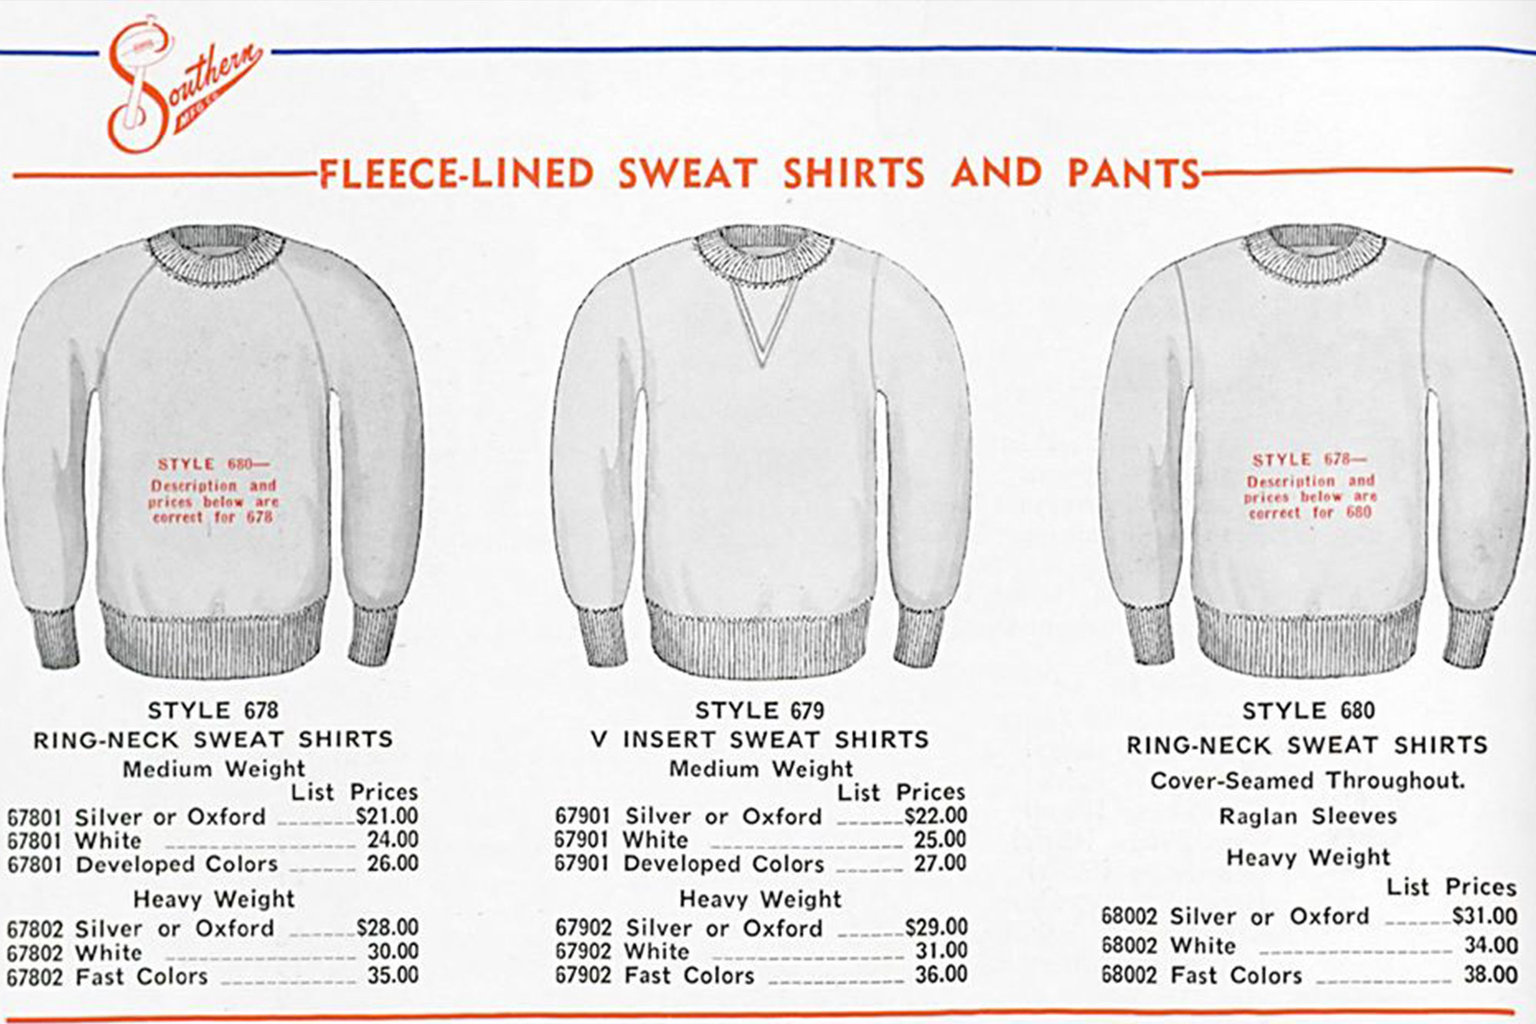 History of the Sweatshirt by the Inventors